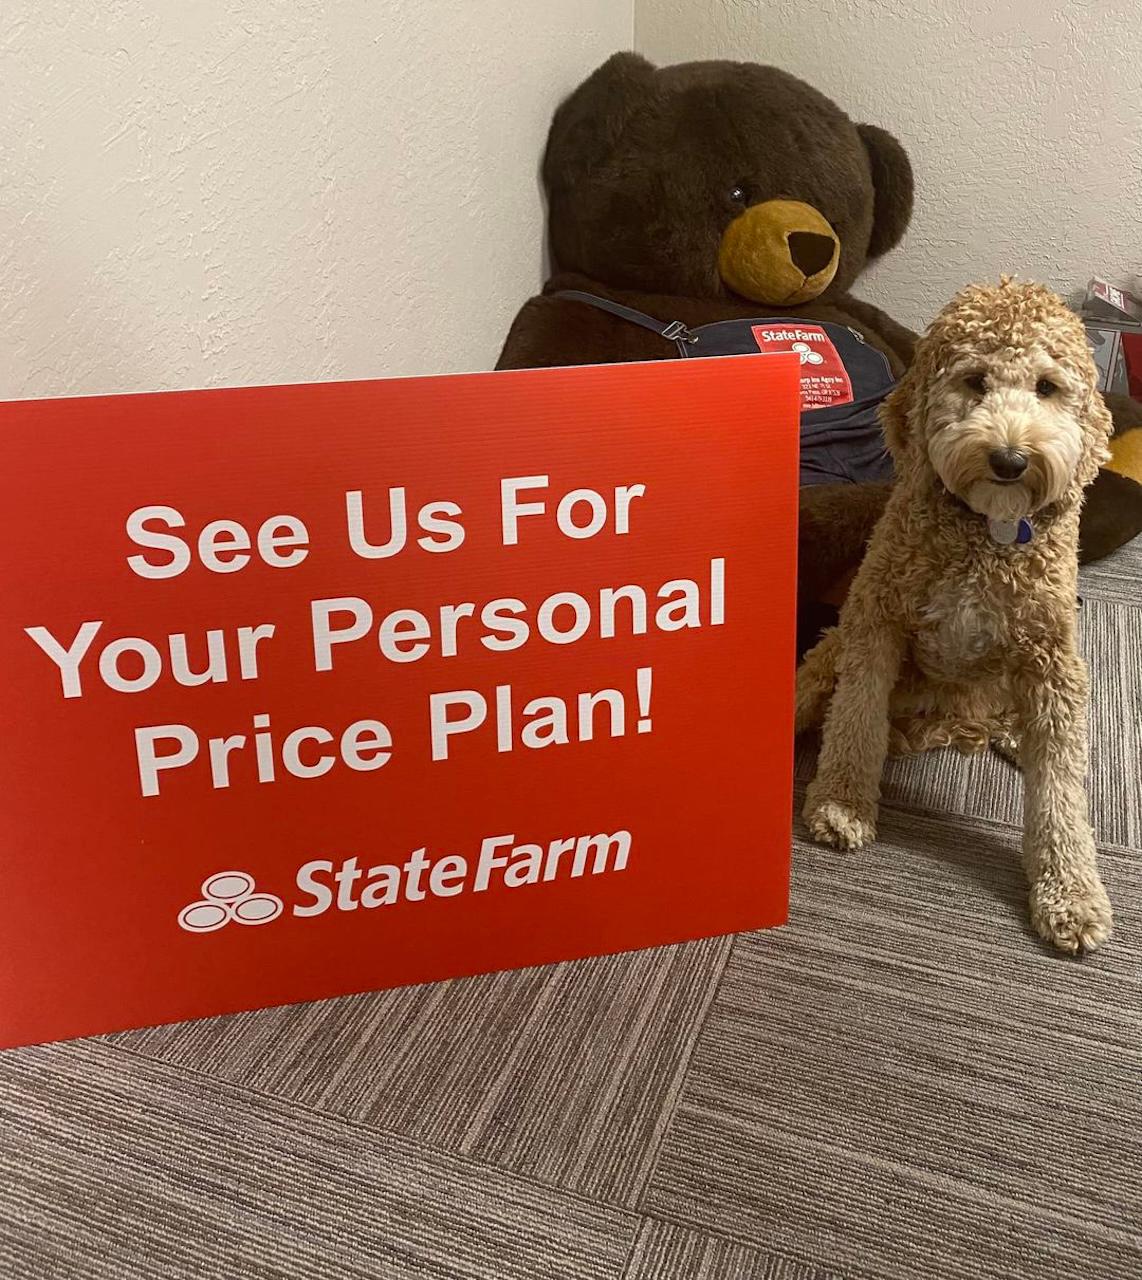 Come see us to get a Personal Price Plan together!